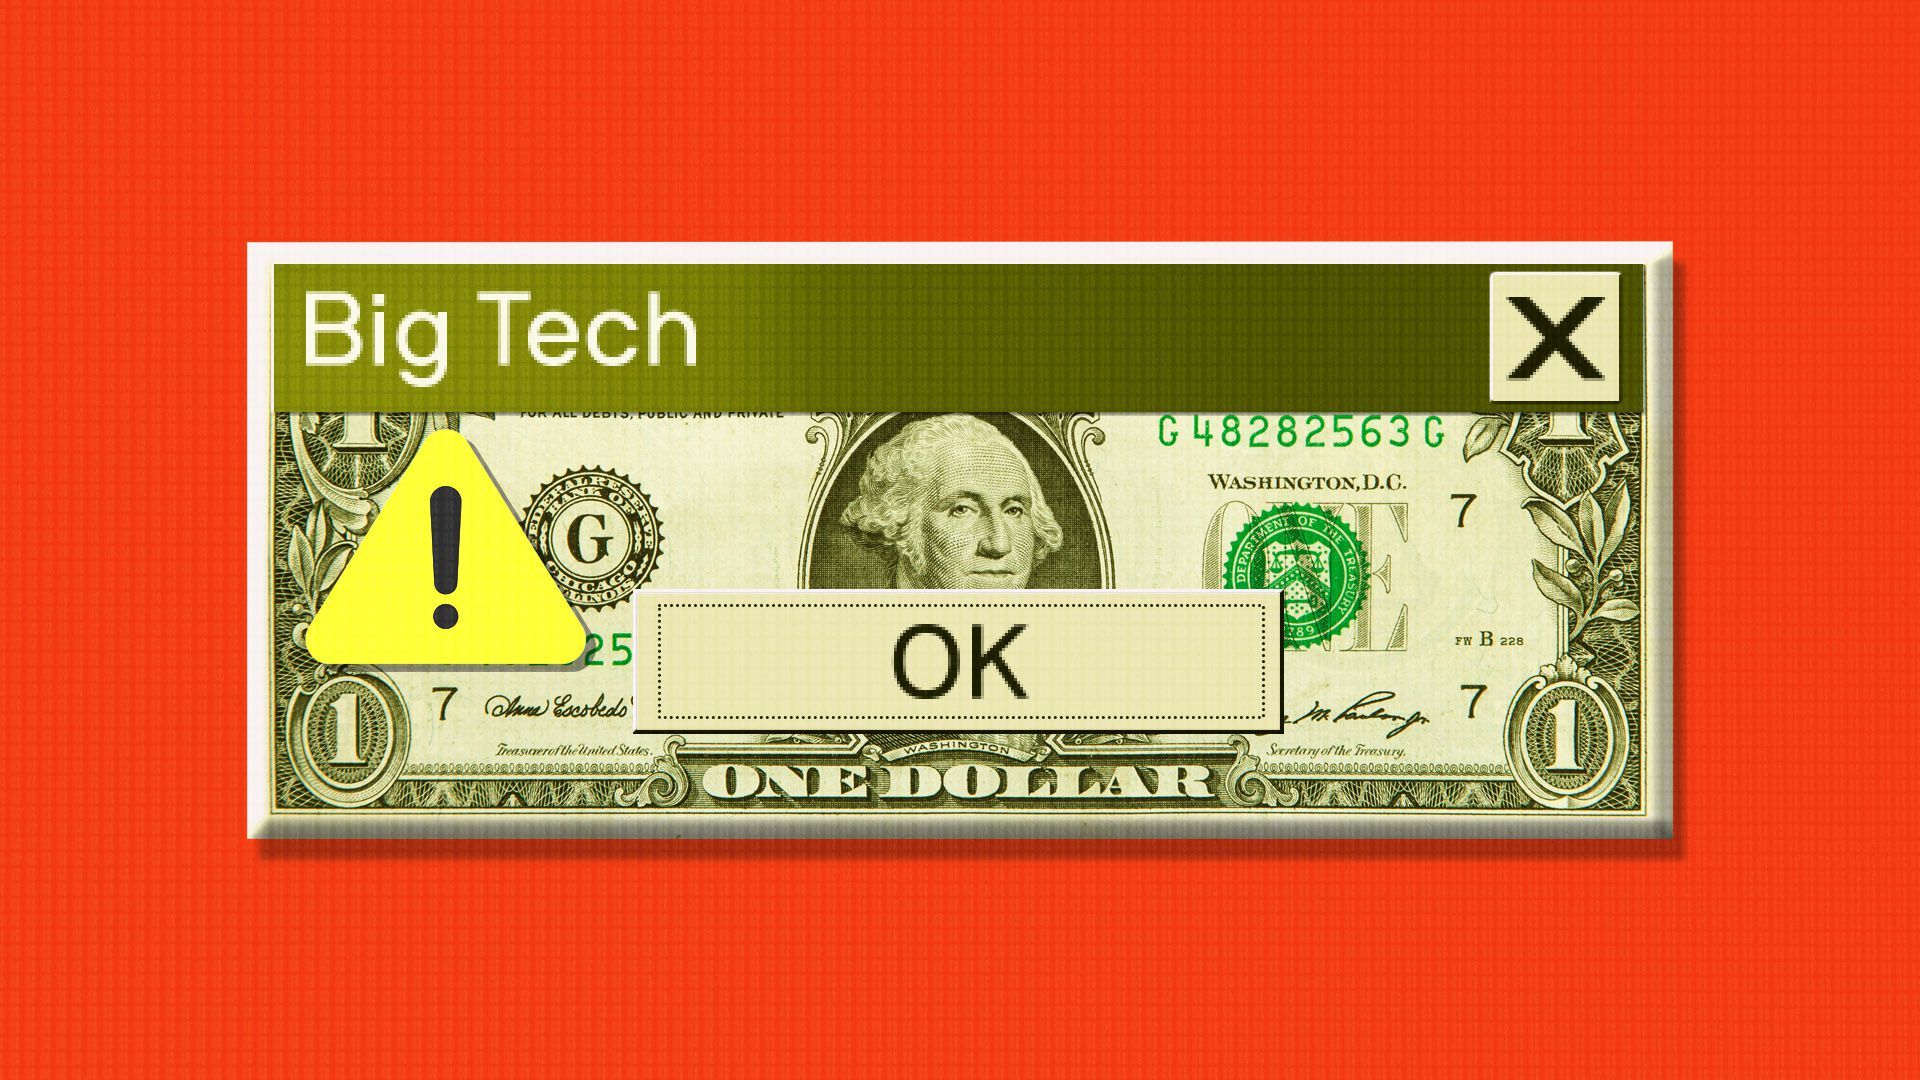 Illustration of a dollar shaped like a computer error dialogue box that reads "big tech"